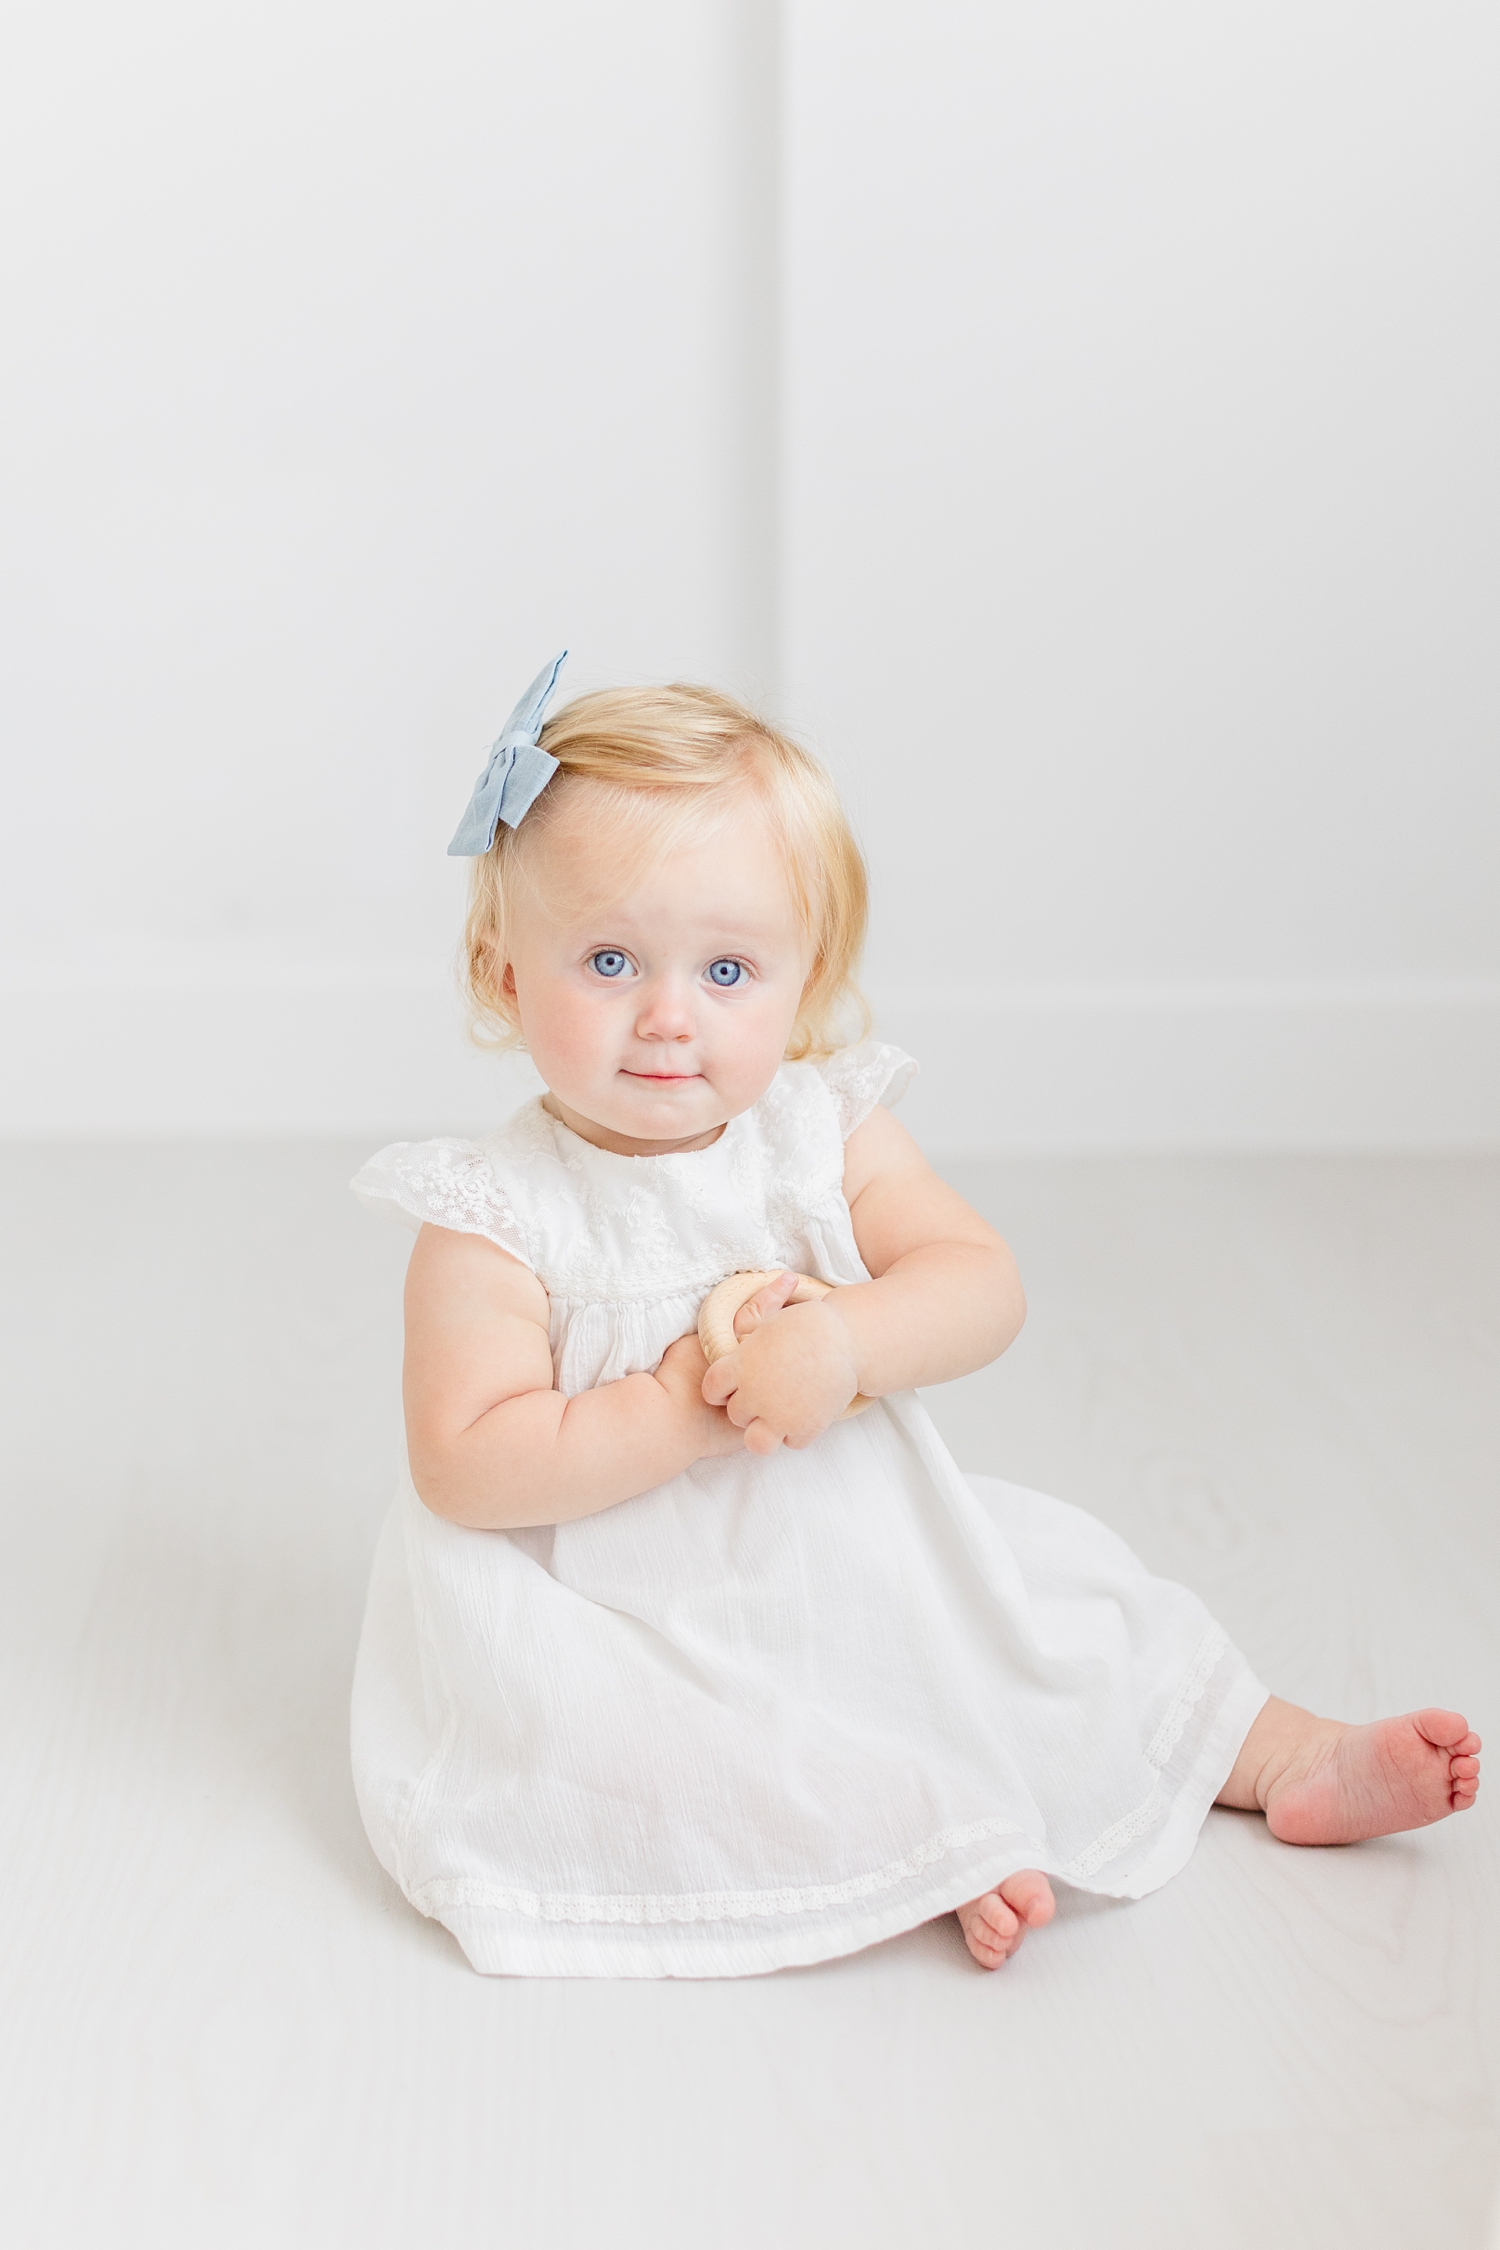 Baby Ryer dressed in an antique white dress plays with a wooden toy in an all white room | CB Studio